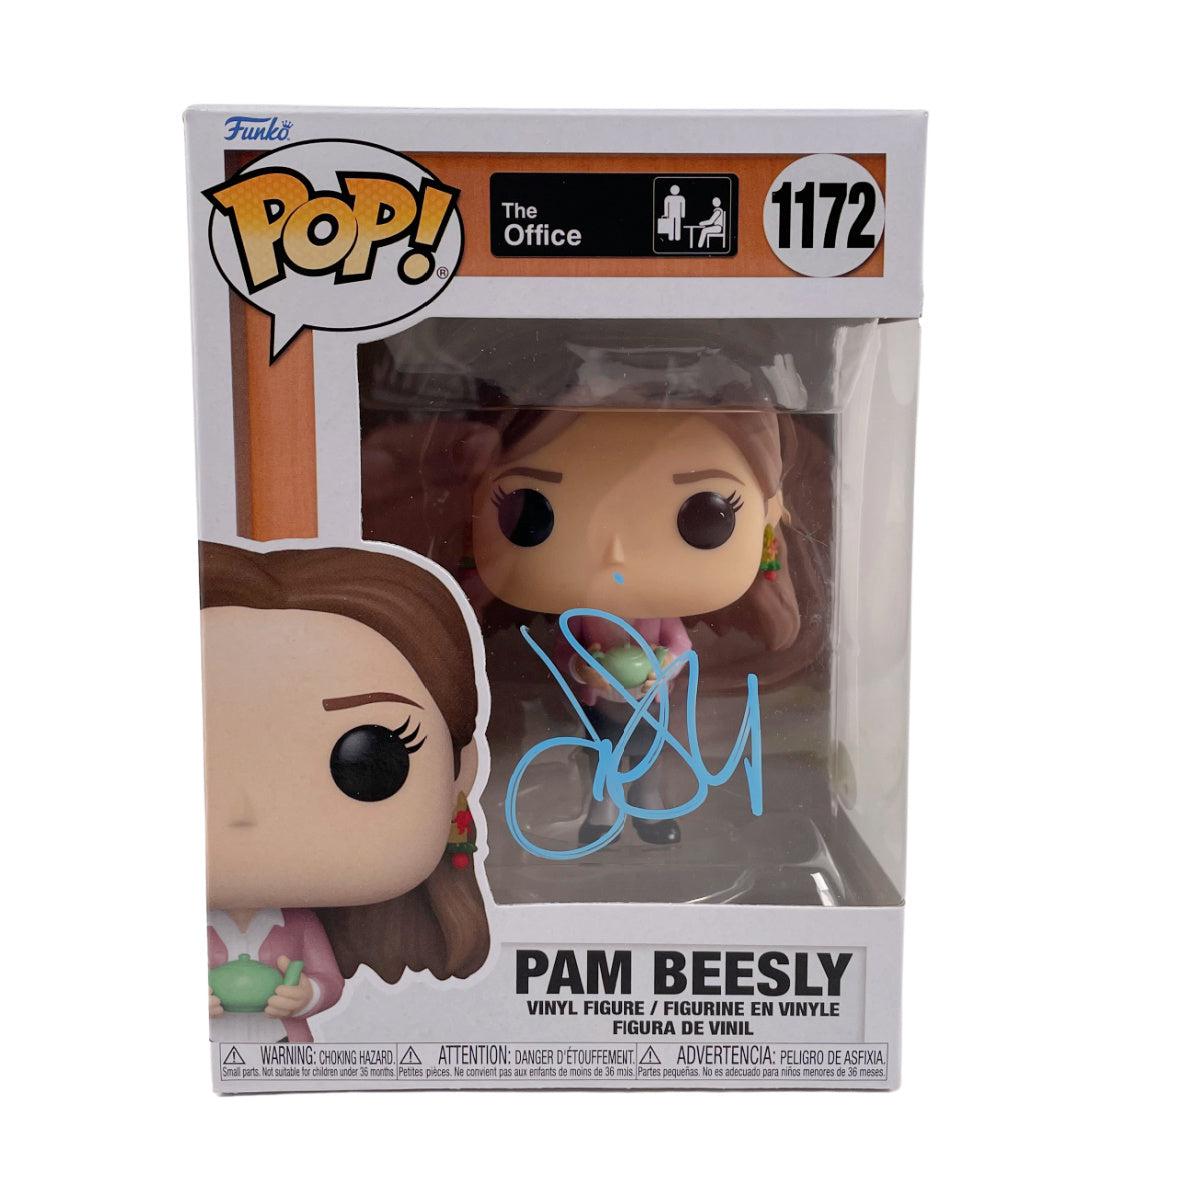 Jenna Fischer Signed Funko POP The Office Pam Beesly 1172 Autographed JSA B